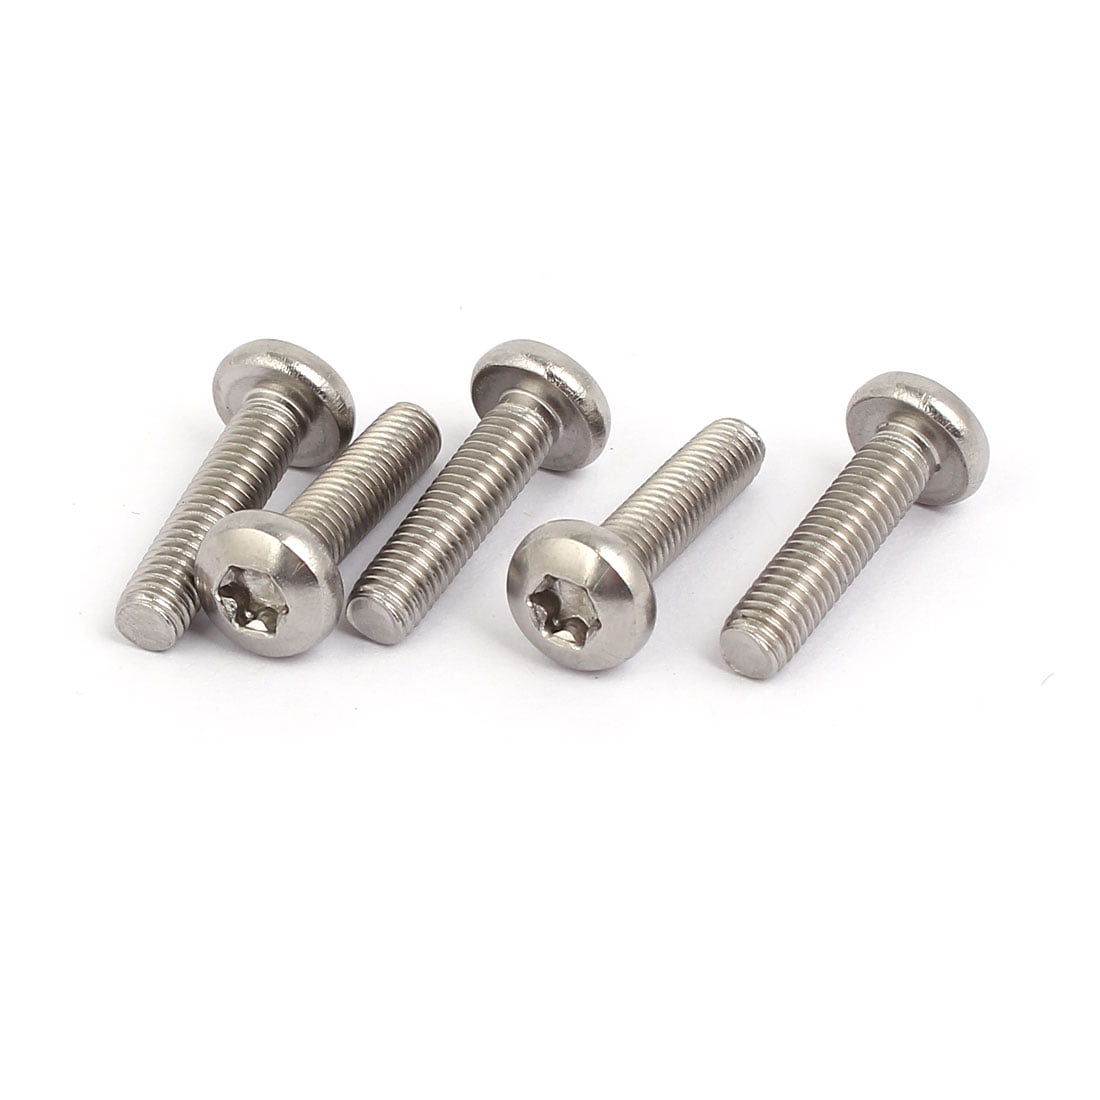 Qty 20 Button Post Torx M5 x 12mm Stainless T25 Security Screw Tamperproof 304 